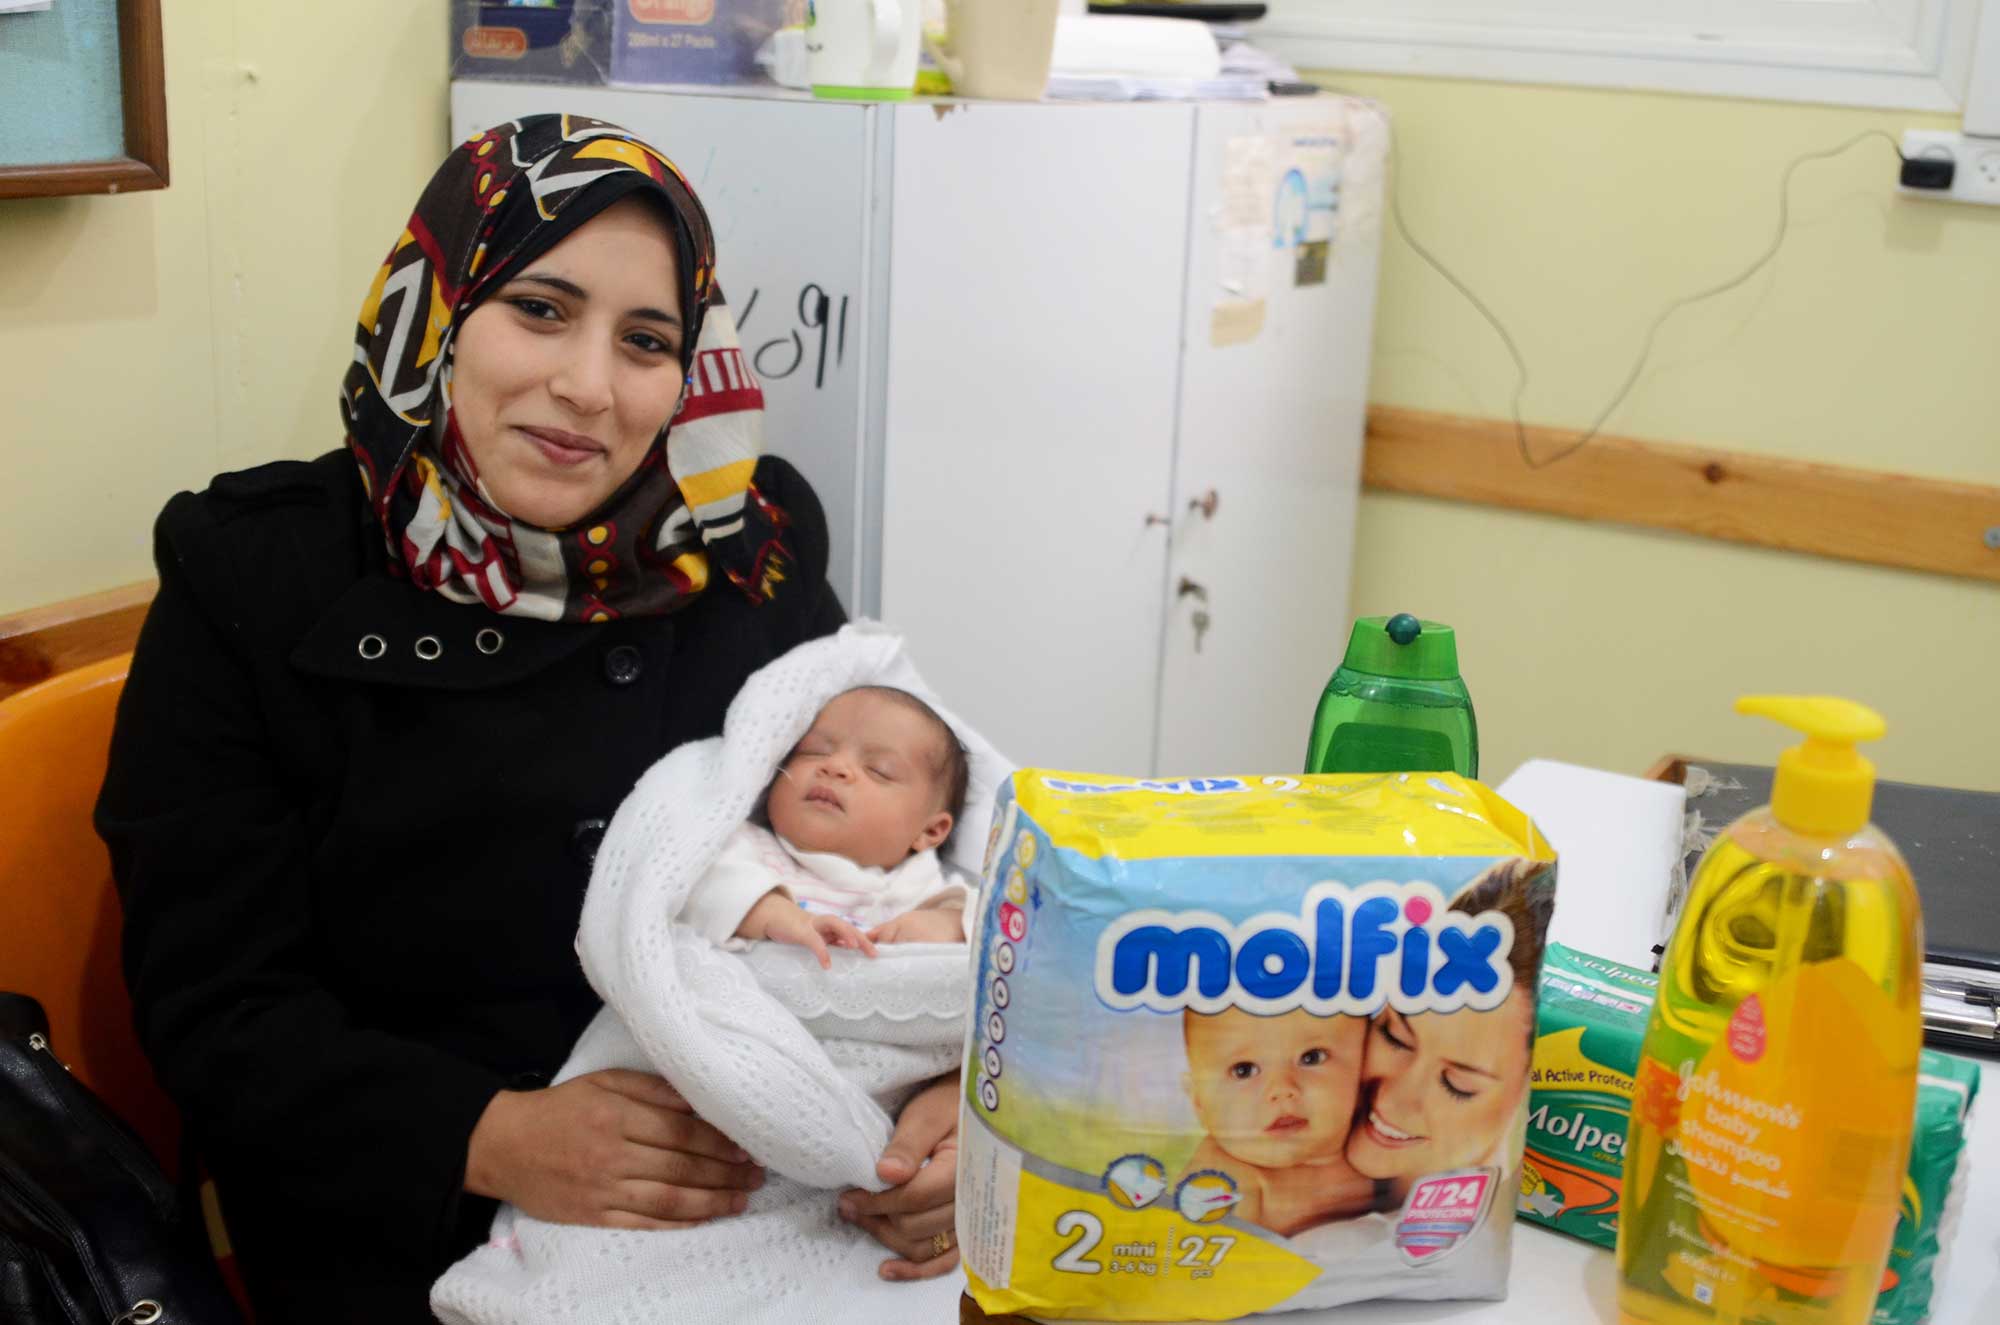 New mother Ohoud received a hygiene kit to help care for her 25-day-old baby girl, Mariya.